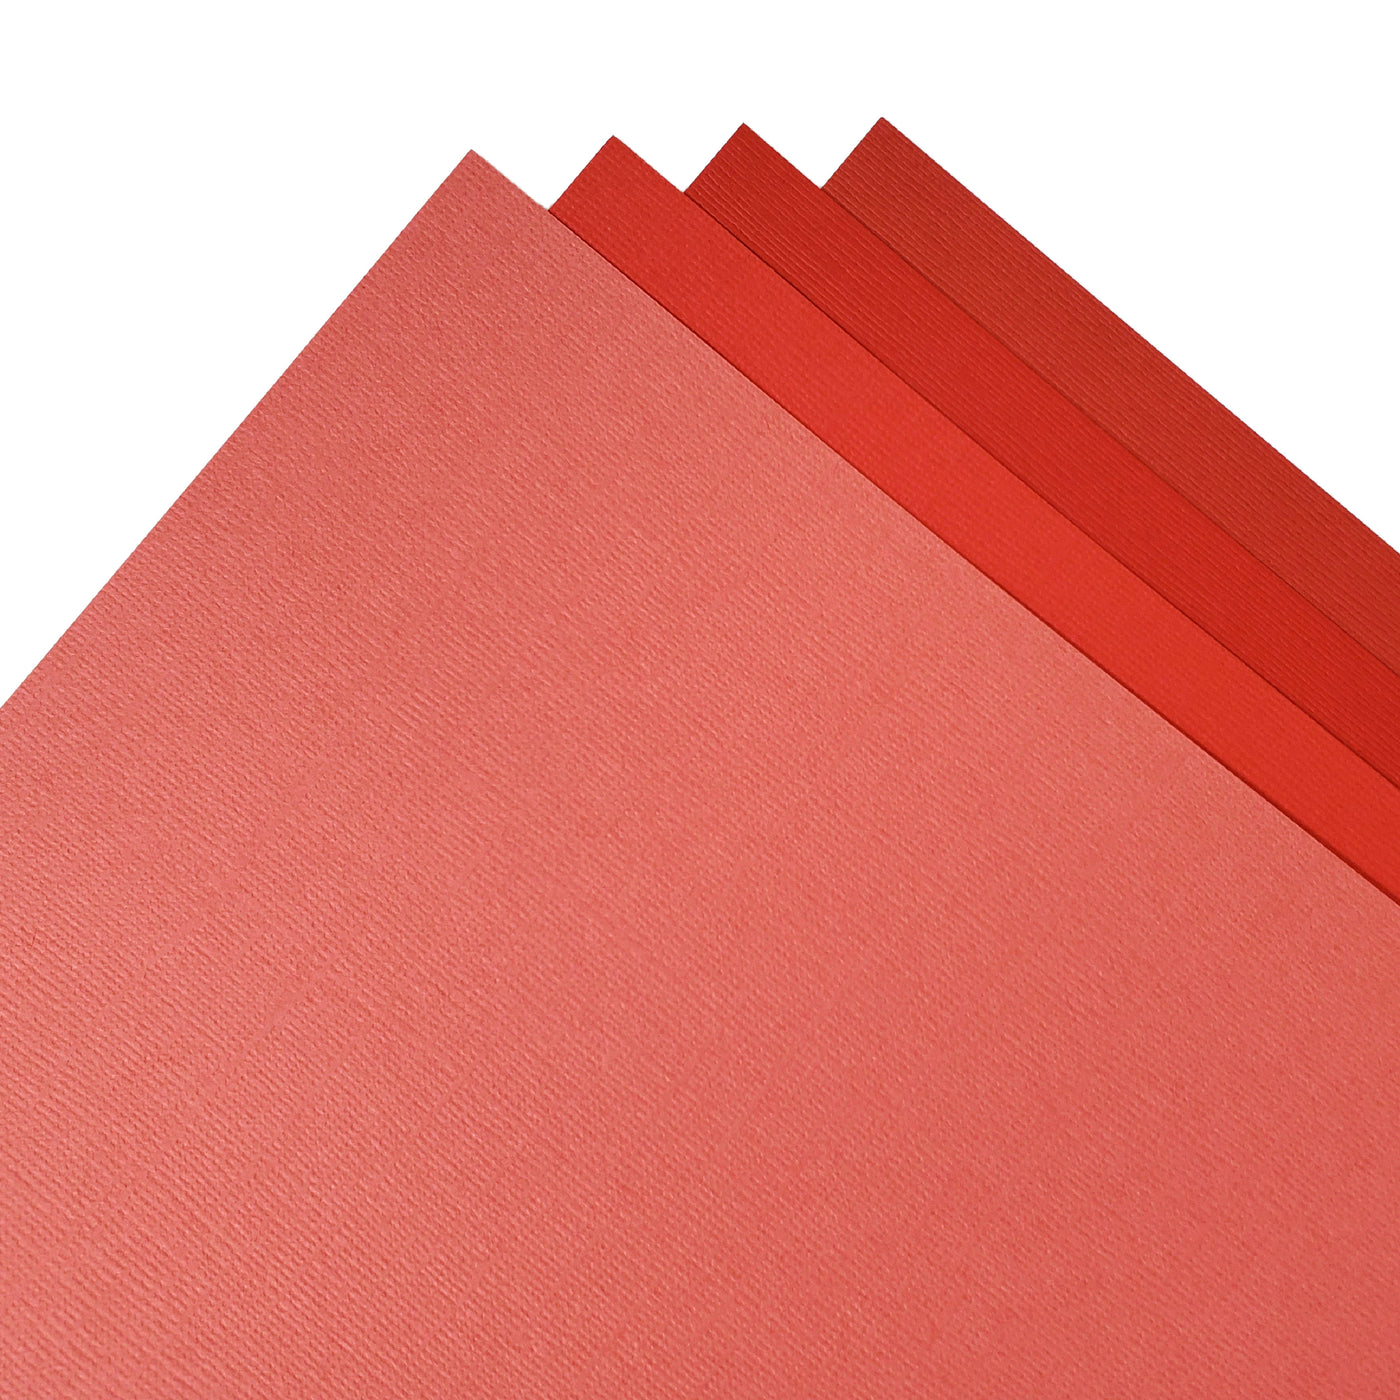 The Red monochromatic assortment includes three (3) each of four (4) shades of red colors of Bazzill textured cardstock.